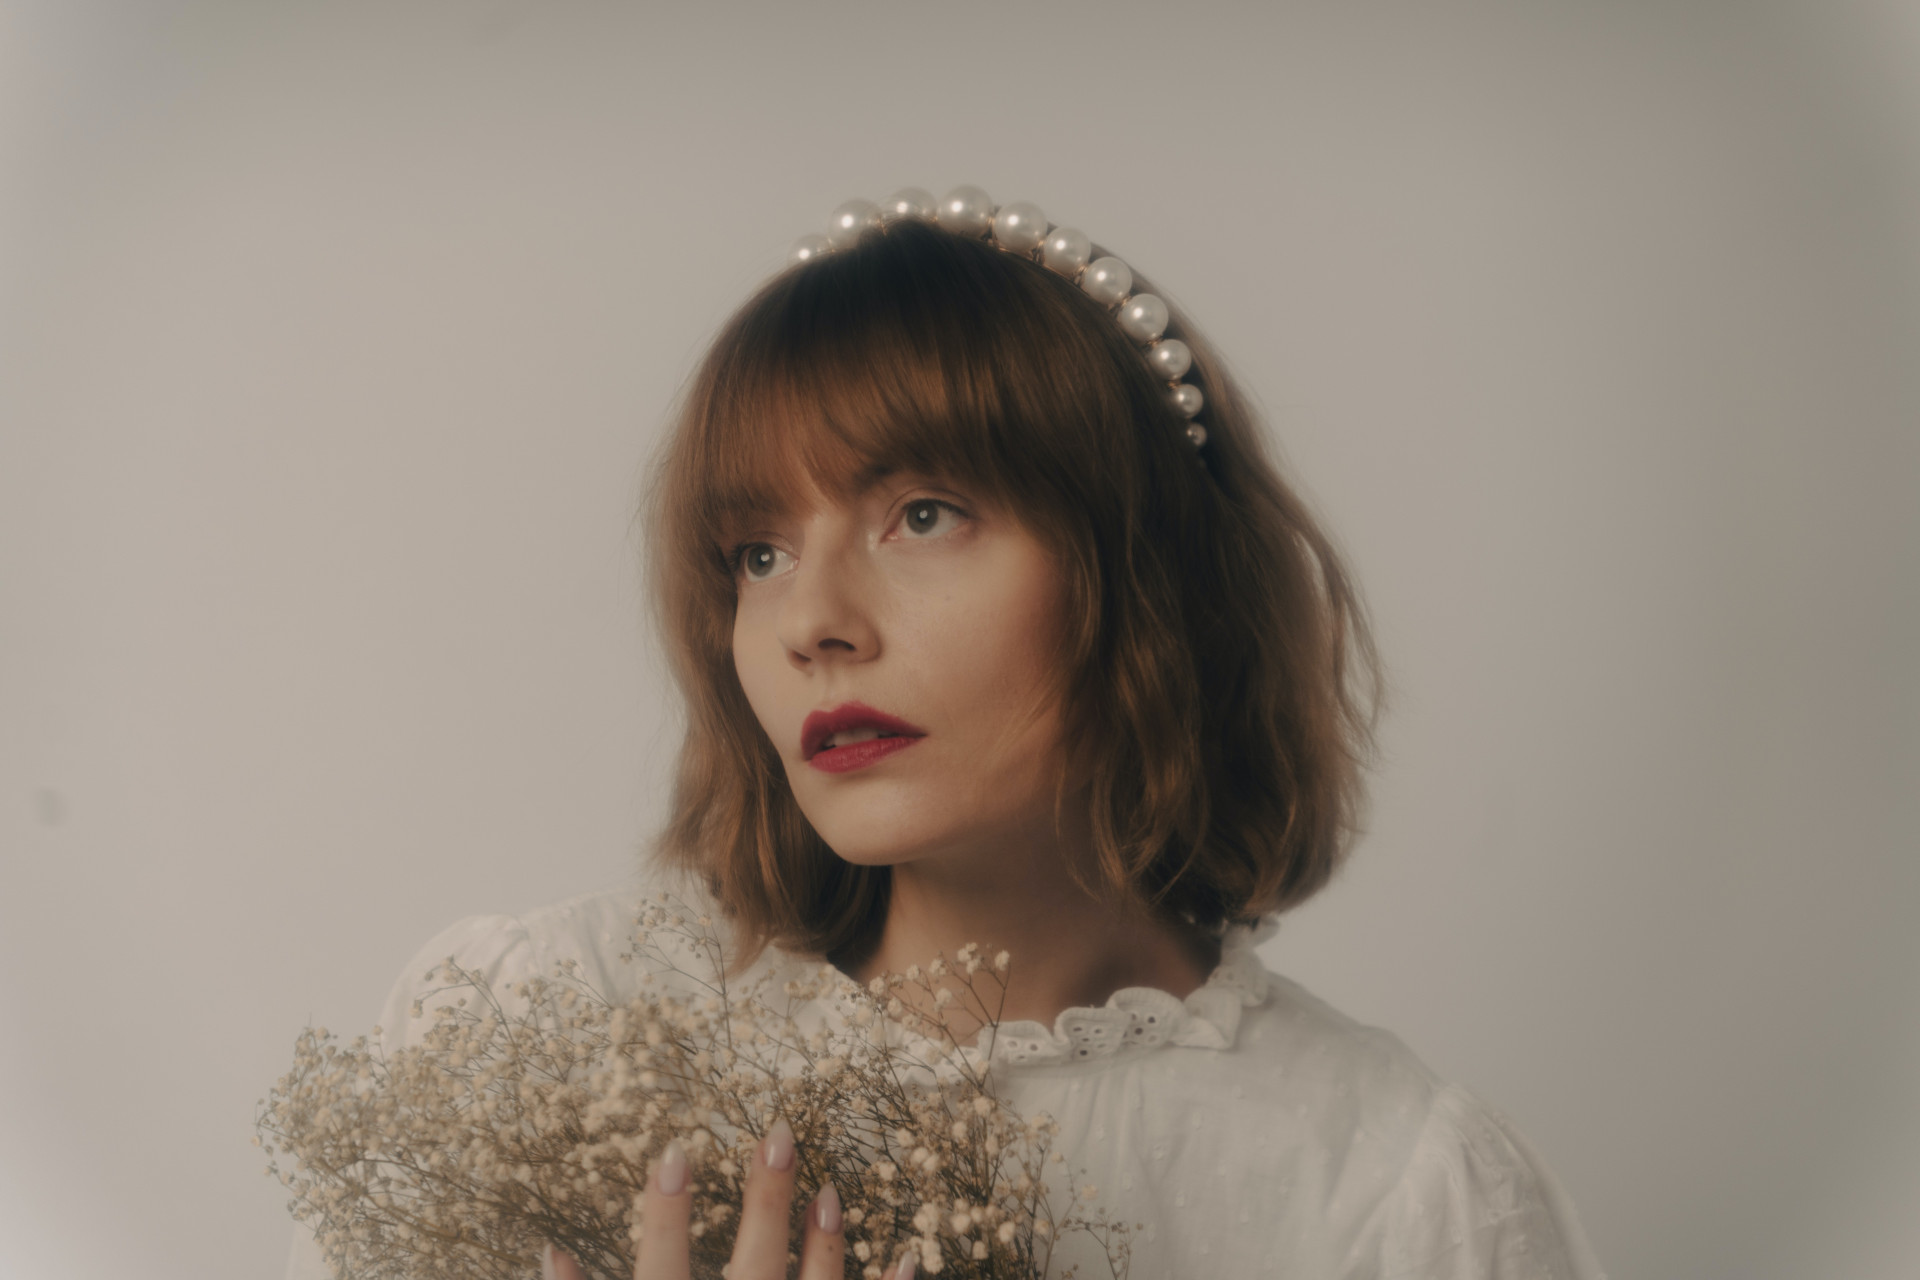 Portrait of a Woman with a Fringe, Holding a Bunch of White Flowers